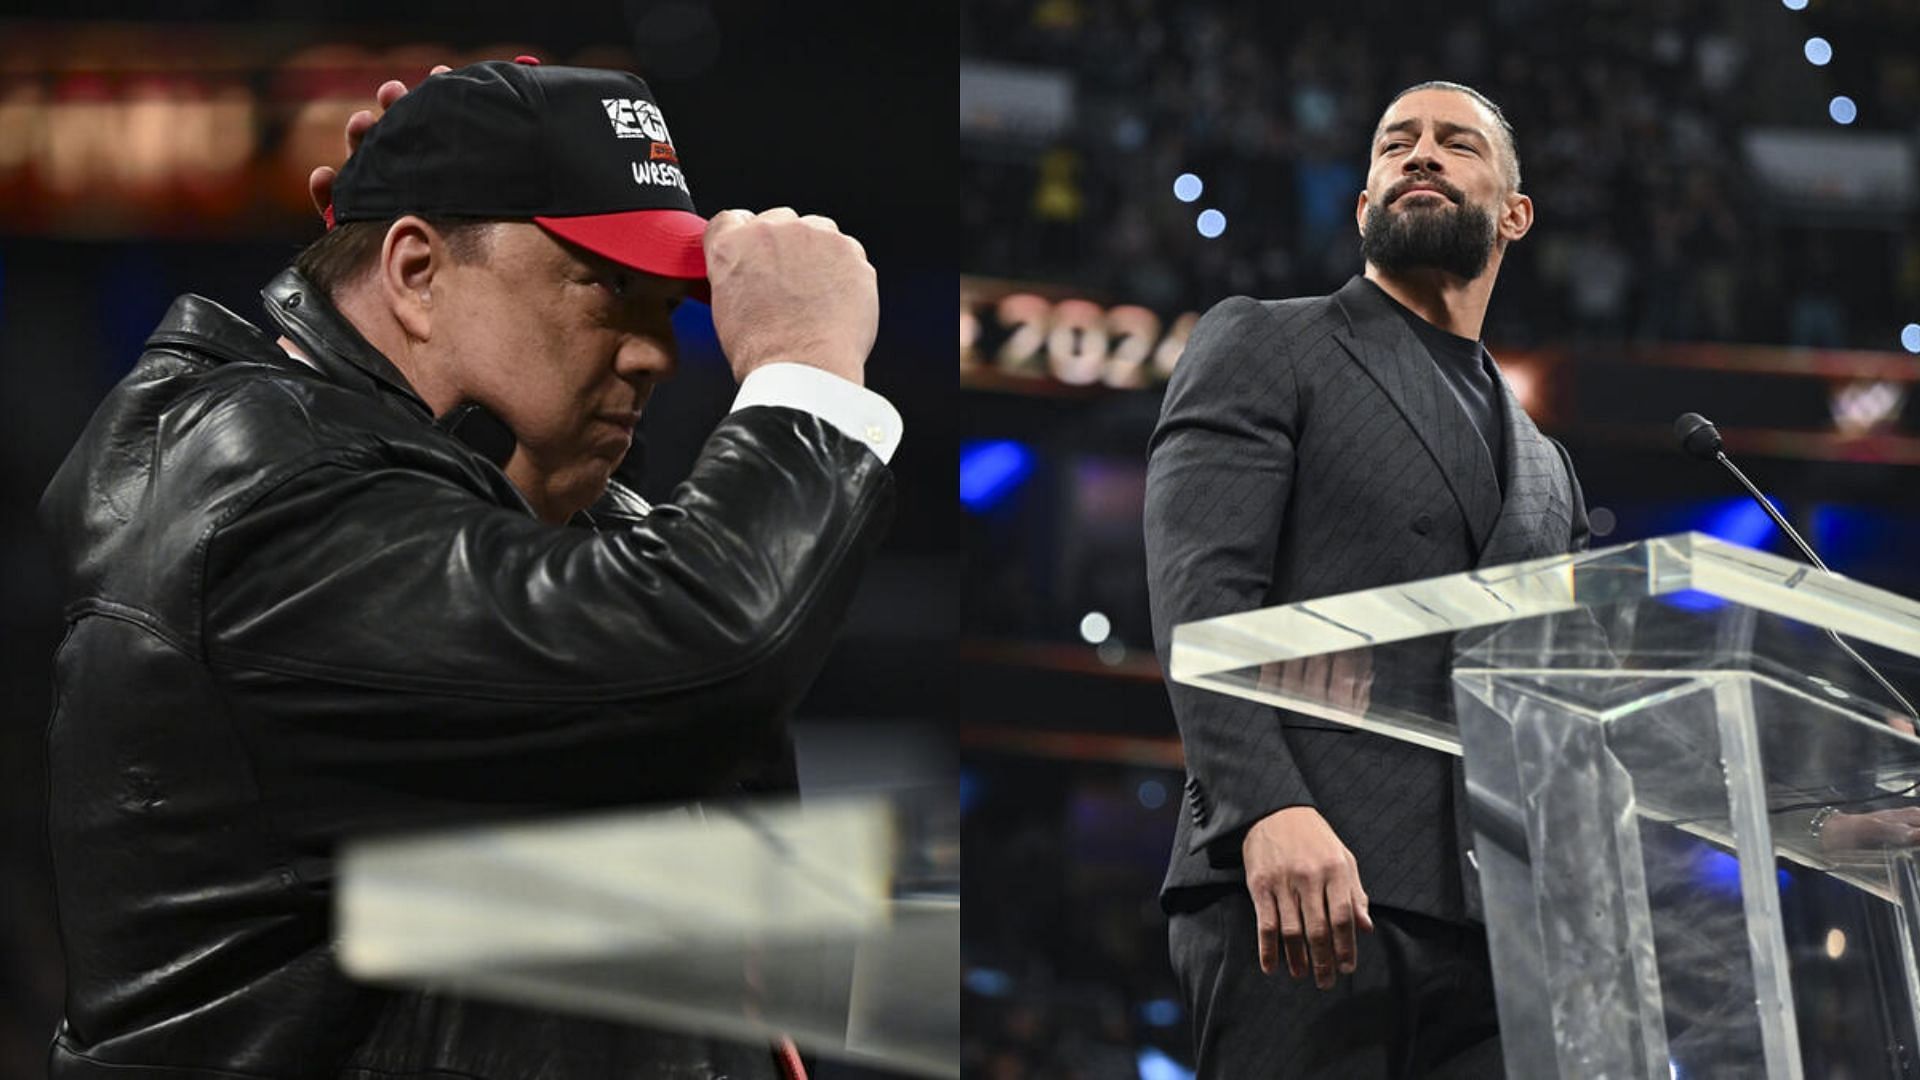 Roman Reigns inducted Paul Heyman into the WWE Hall of Fame (Credit: WWE)